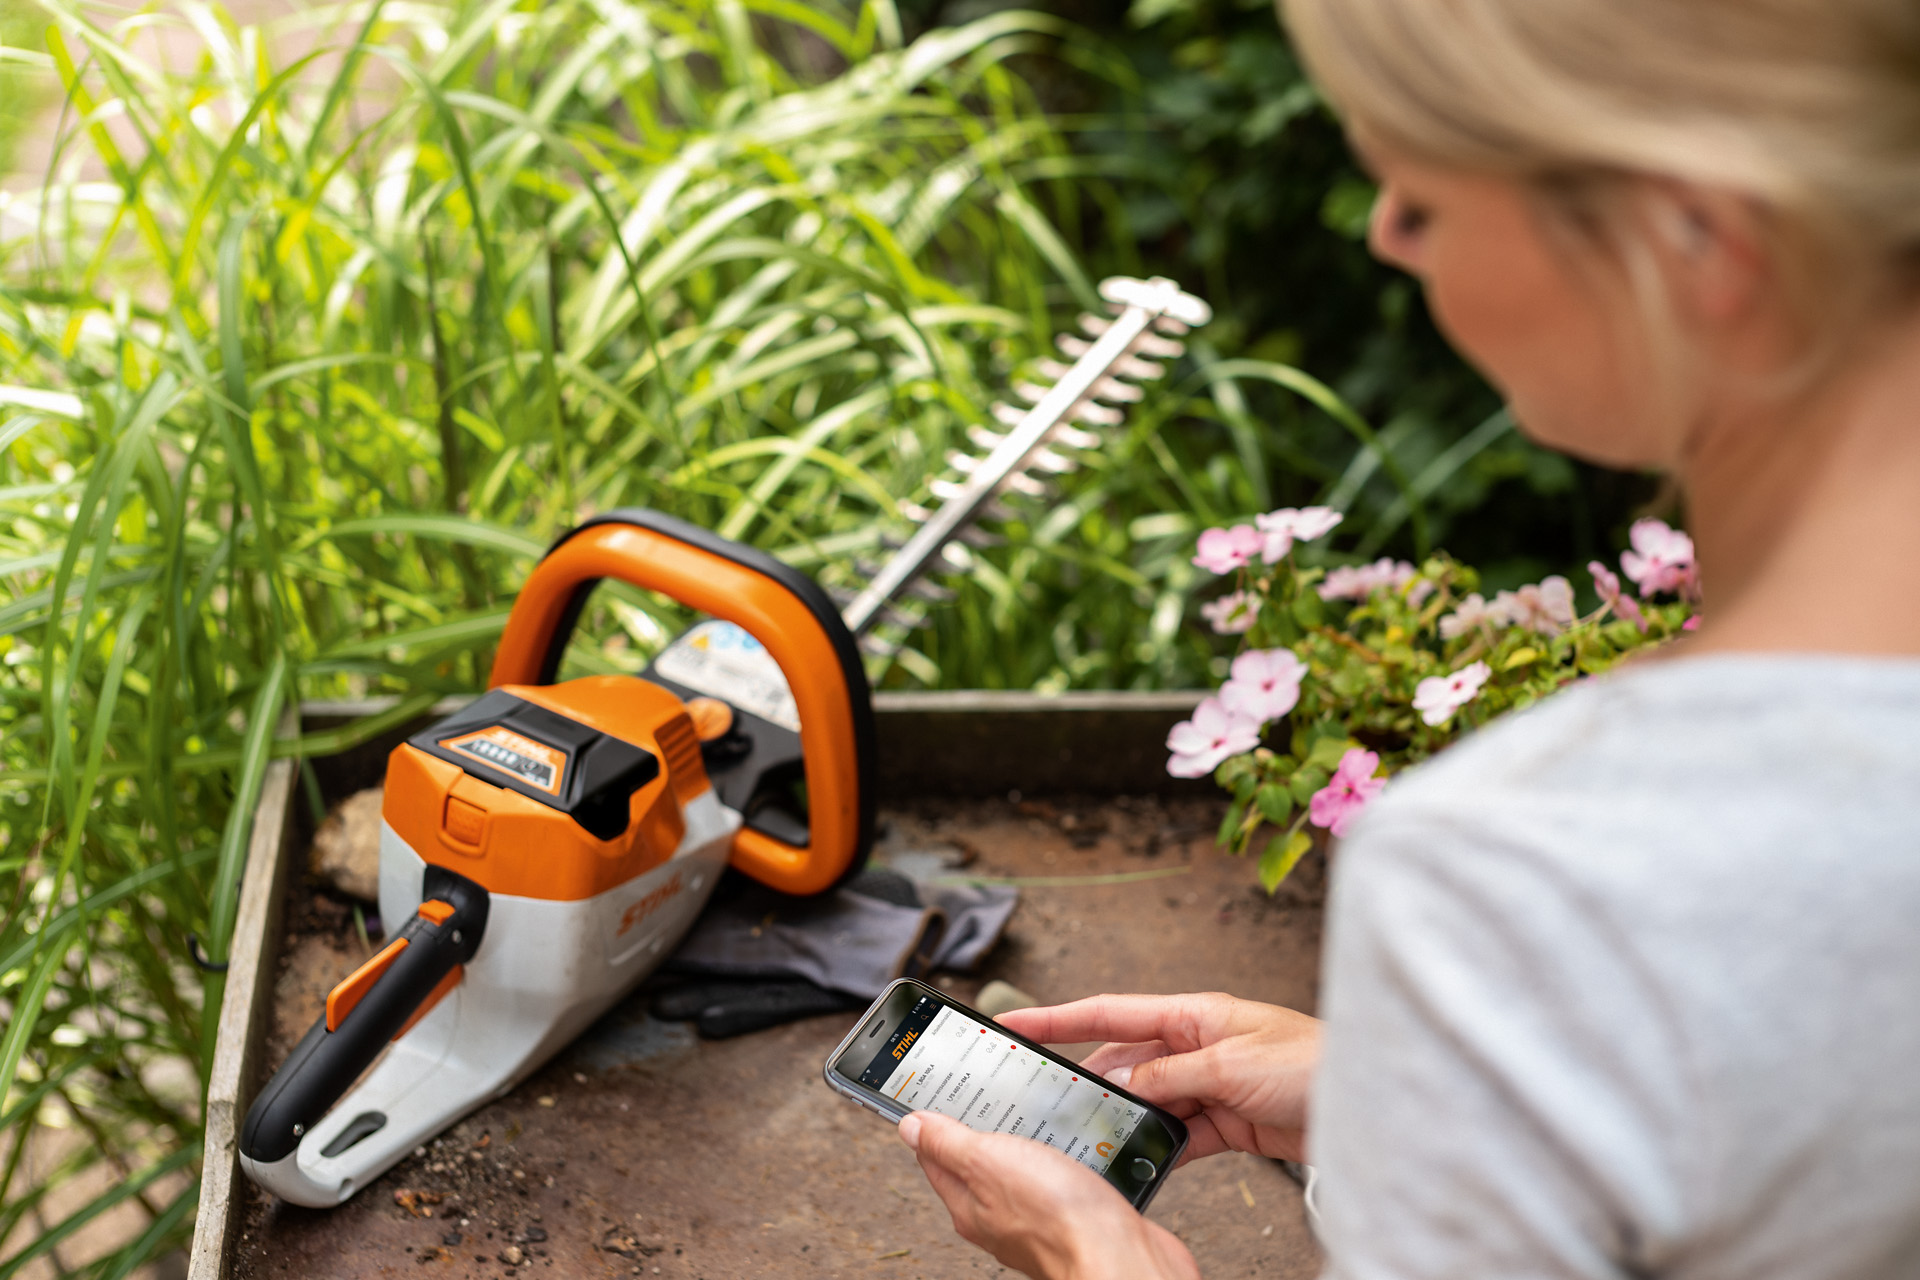 A woman registering her STIHL hedge trimmer using the STIHL app on a smartphone